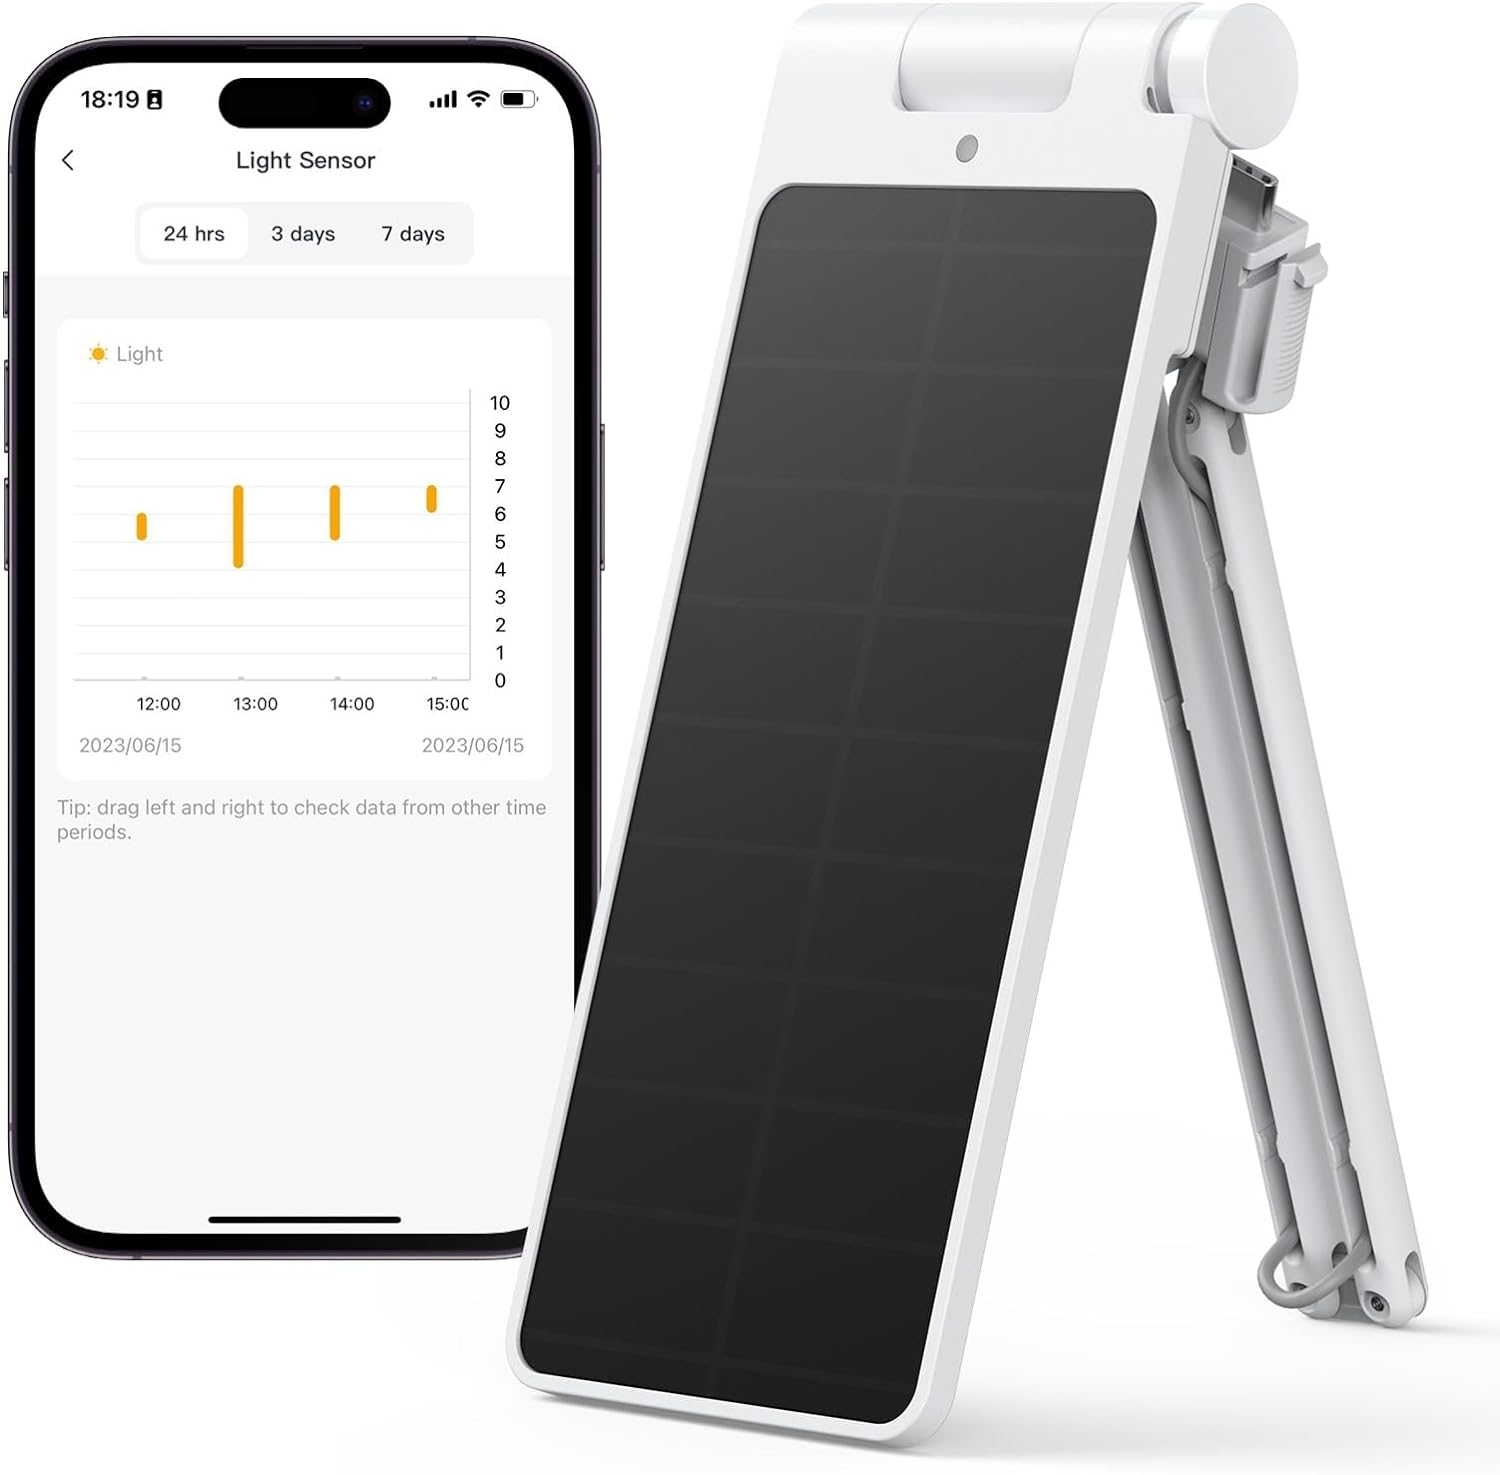 SwitchBot Solar Panel Charger for Curtain 3 - Performance Upgrade, Easy to Use, Support Low Light Charging, Smart Solar Panel for SwitchBot Curtain 3 Rod/U Rail, Non-Stop Solar Power Supply